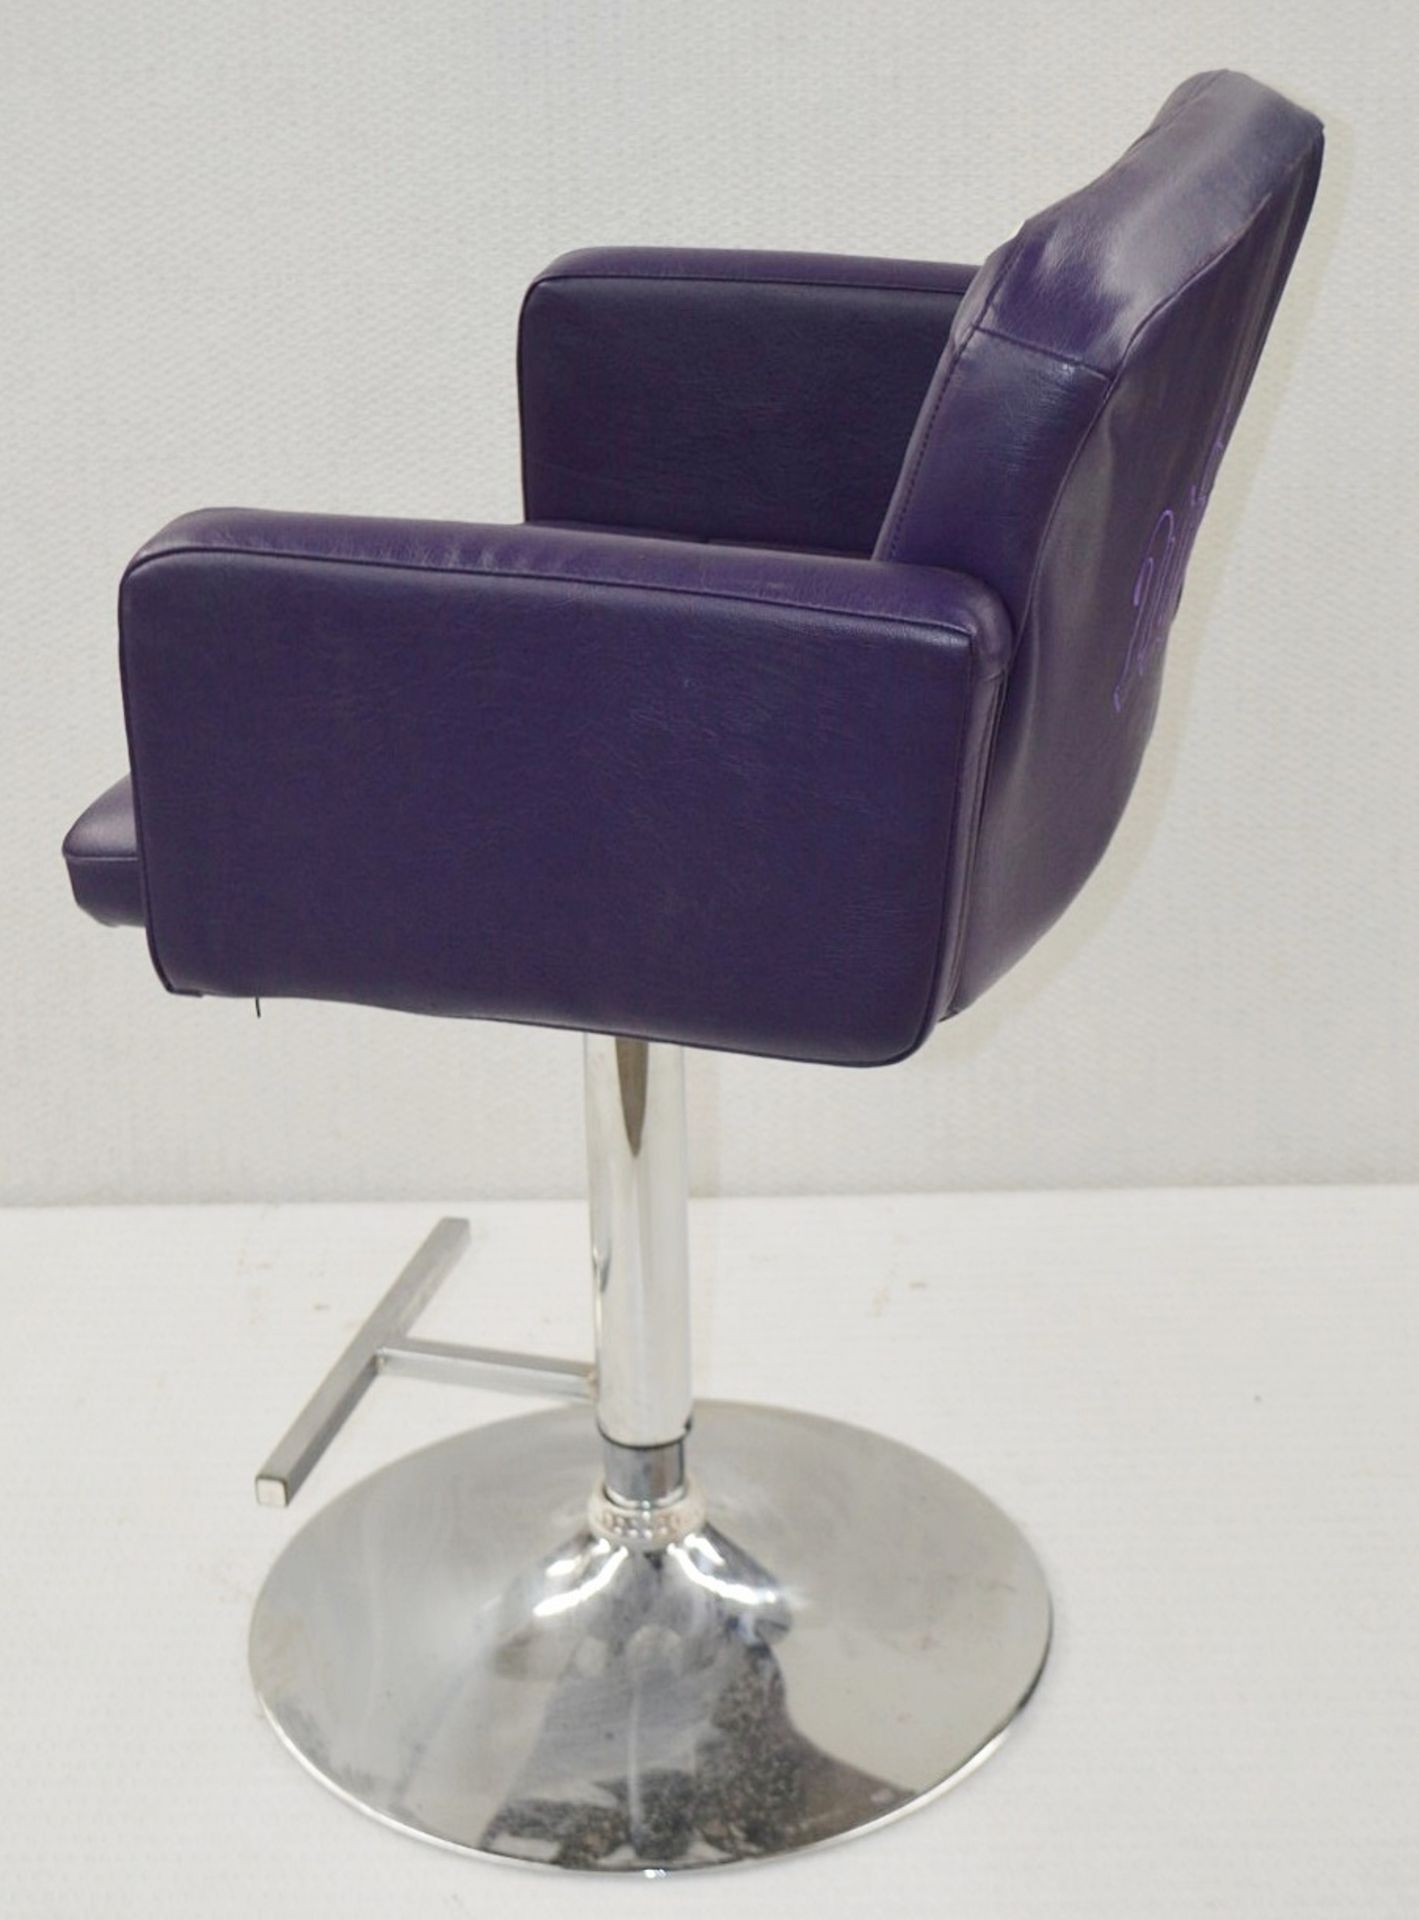 1 x URBAN DECAY Branded Gas-Lift Beauty Salon Swivel Chair With Foot Plate - Upholstered In Purple - Image 6 of 6